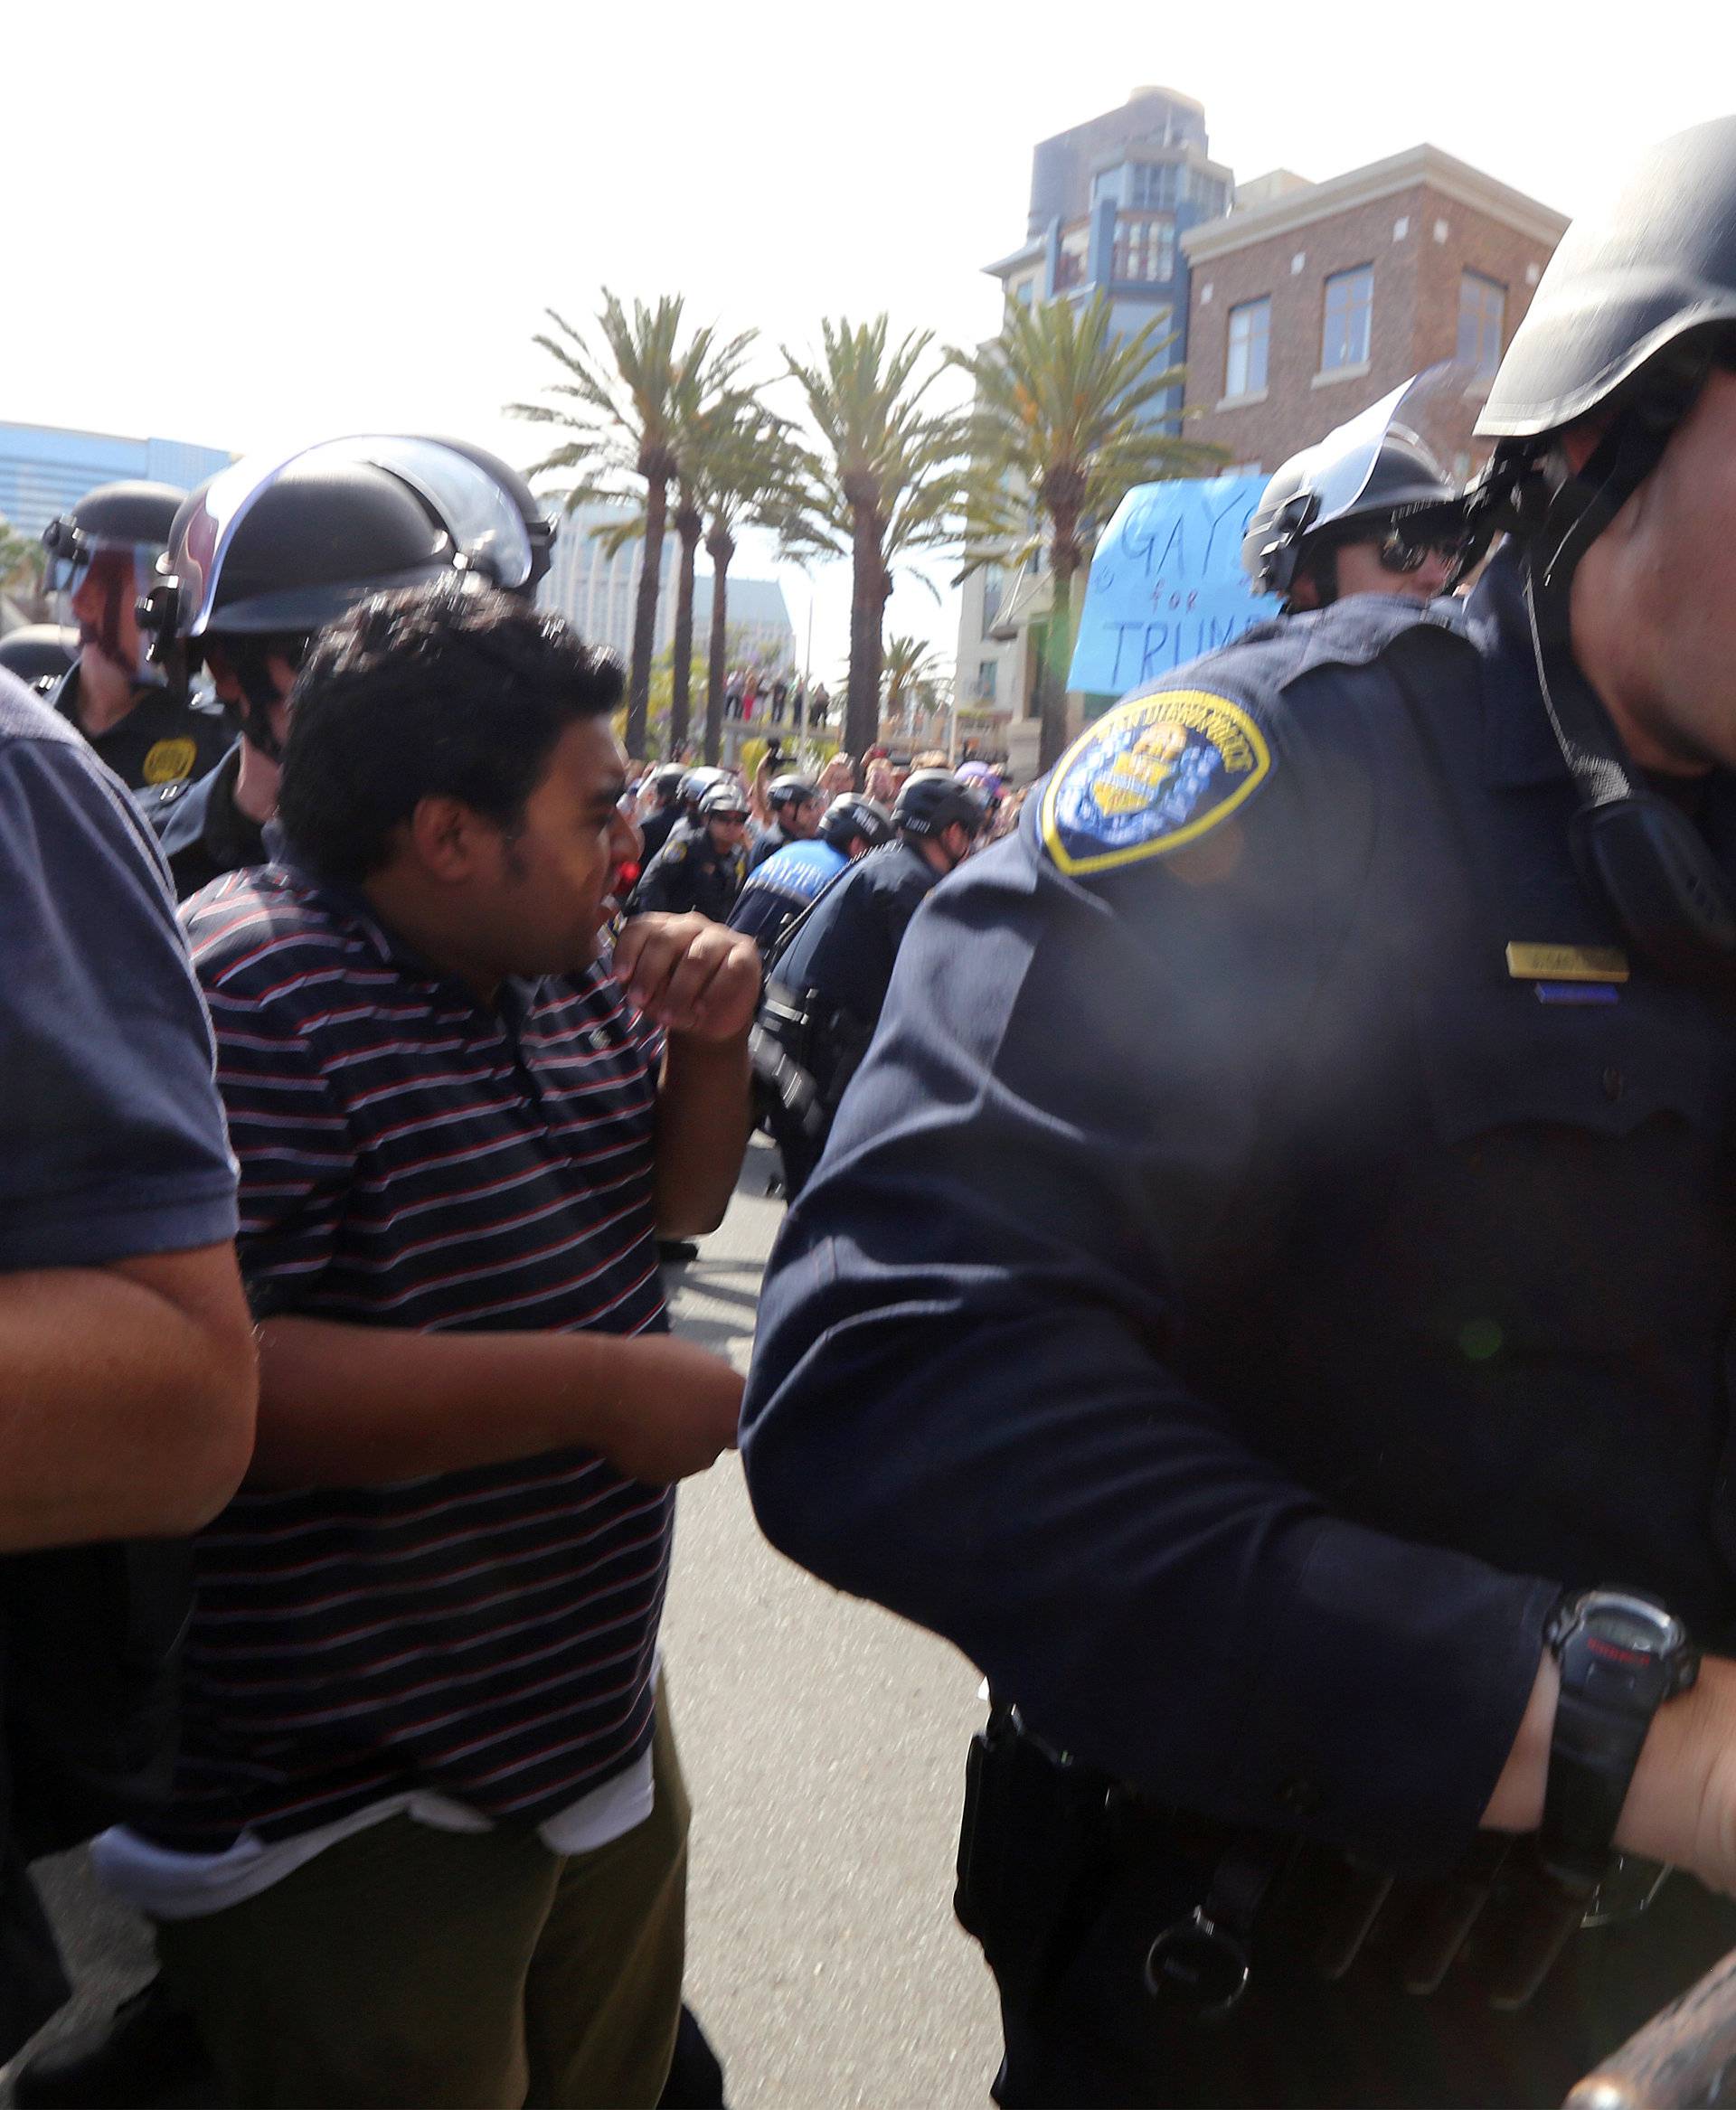 Police shove demonstrators outside a campaign event for Republican U.S. presidential candidate Donald Trump in San Diego